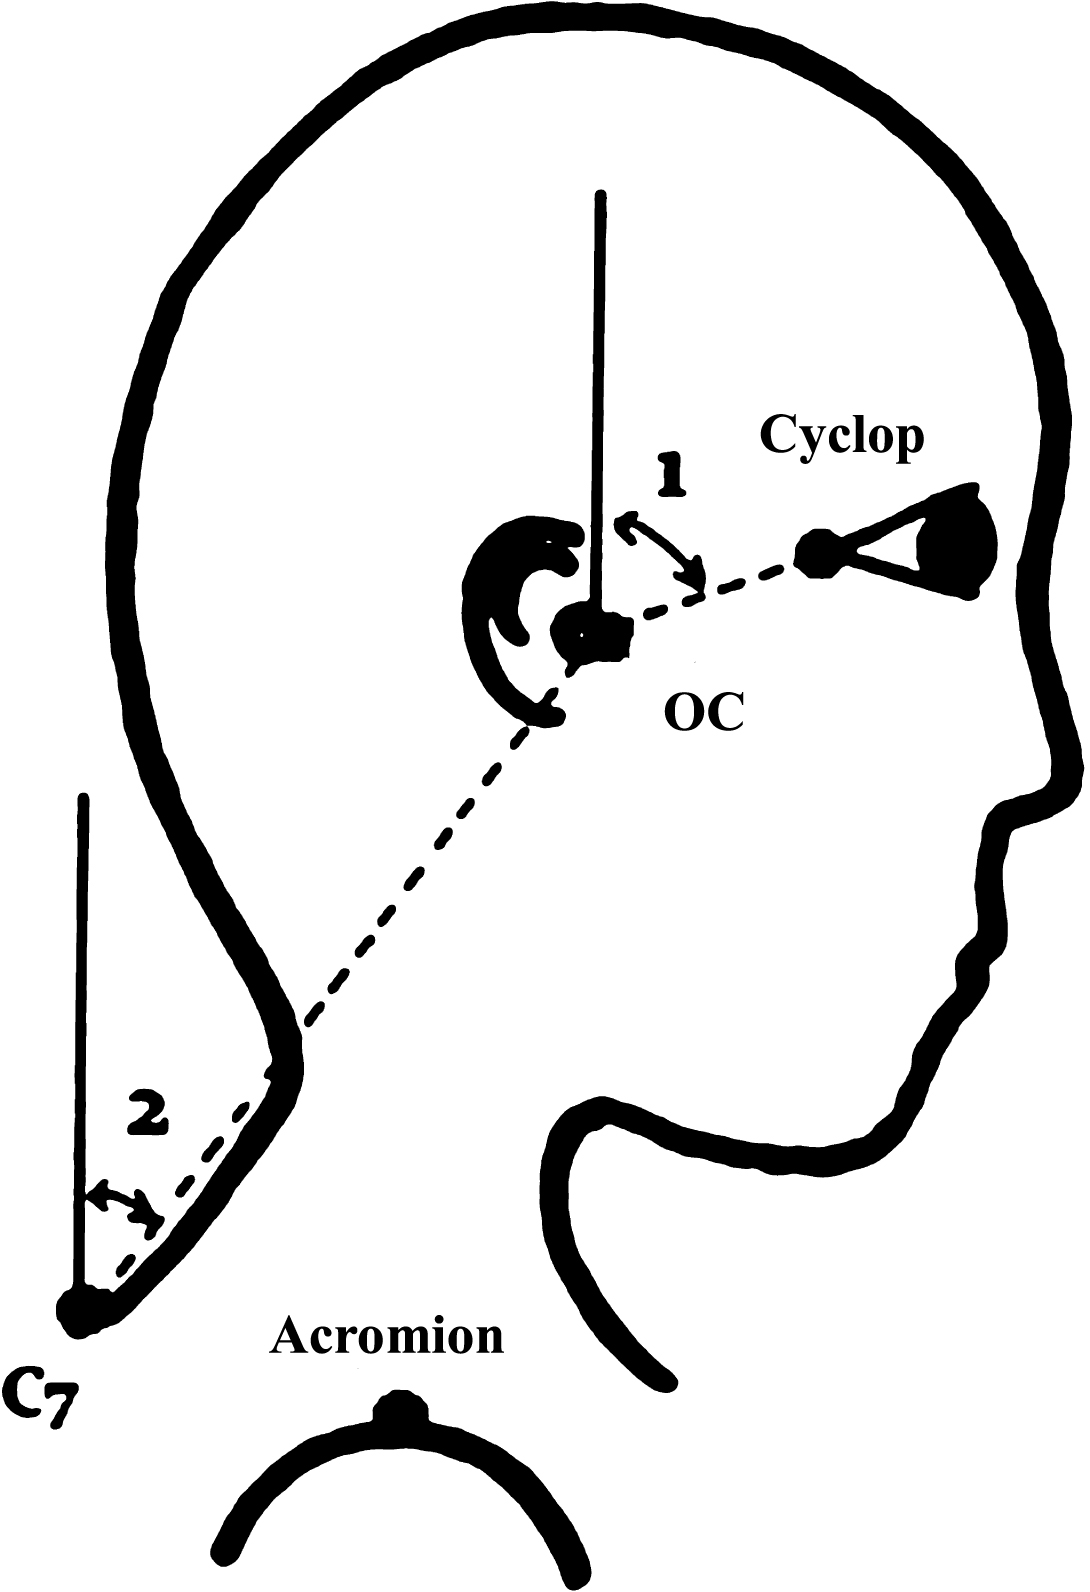 Head and neck flexion angles. Head flexion angle (1) is the angle between the global vertical and the vector pointing from occiput-cervical (OC) to Cyclops (midpoint between the left and right outer canthi), Neck flexion angle (2) is the angle between global vertical and vector pointing from C7 to OC.